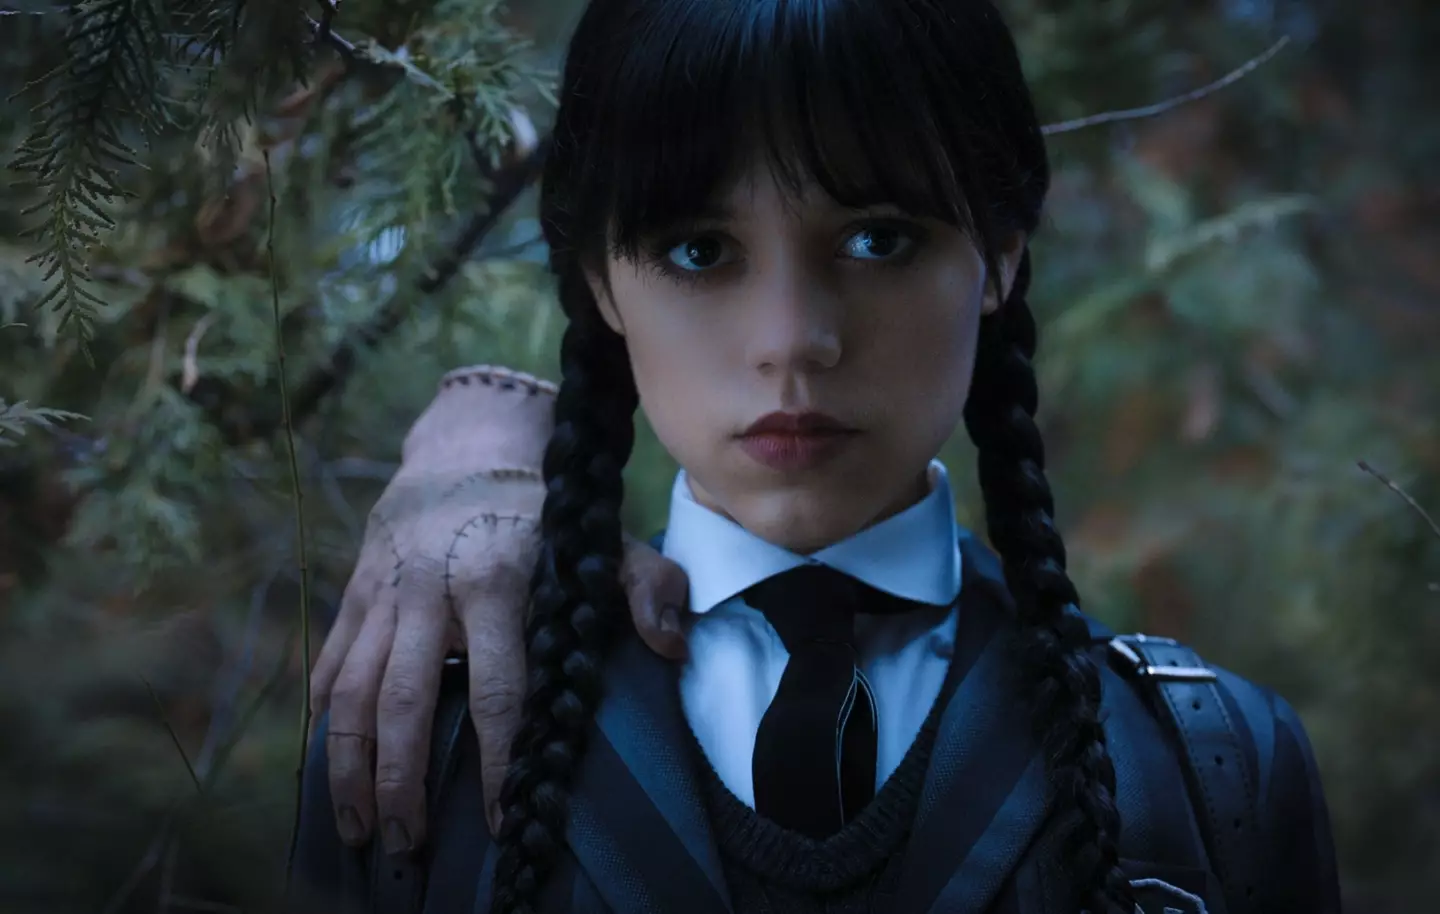 Jenna Ortega plays the title role in Netflix's Wednesday.